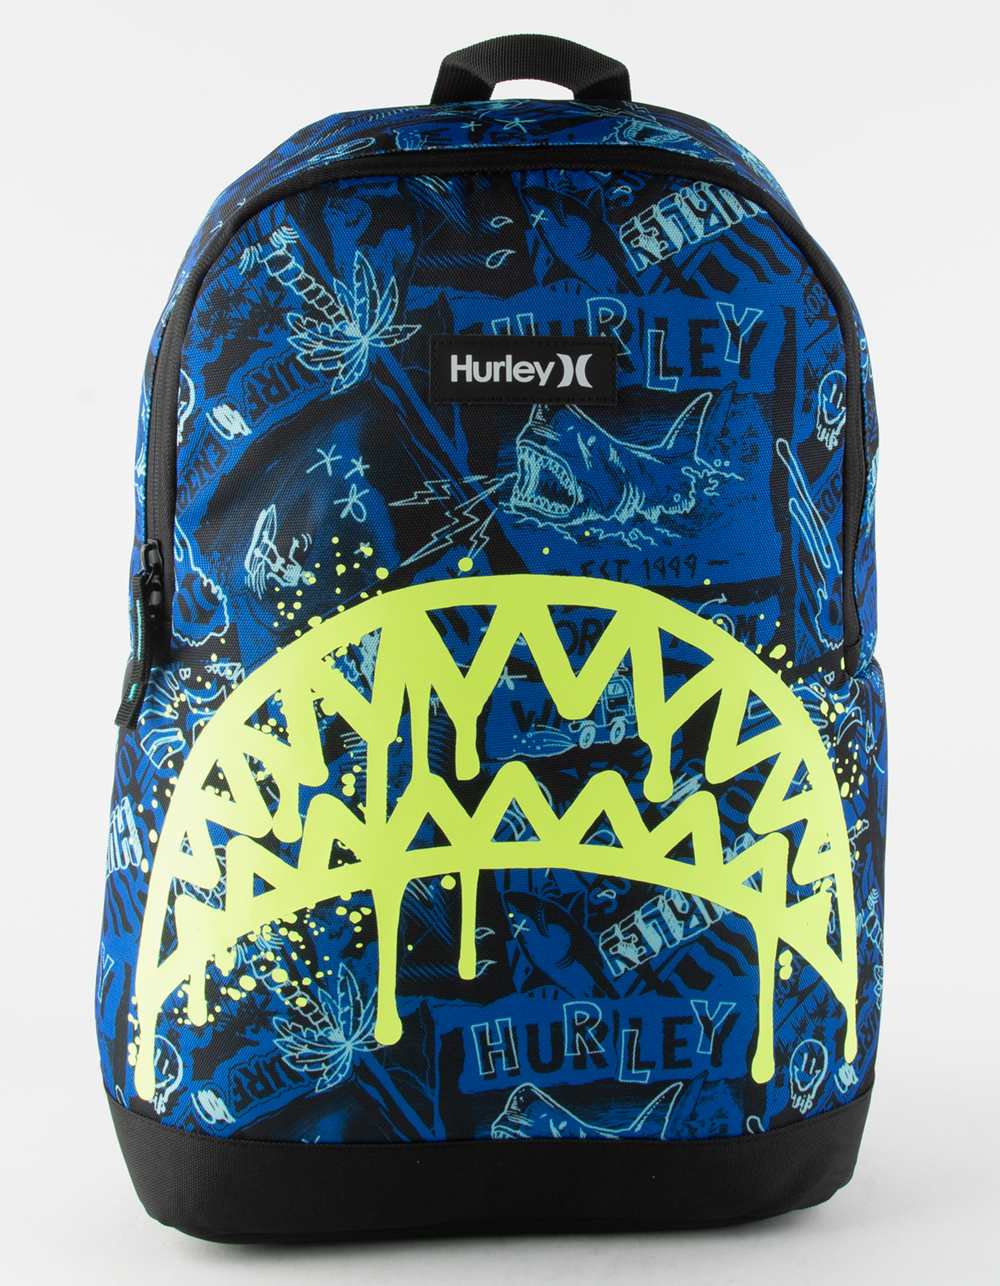 Hurley Unisex-Adults One and Only Backpack, Black